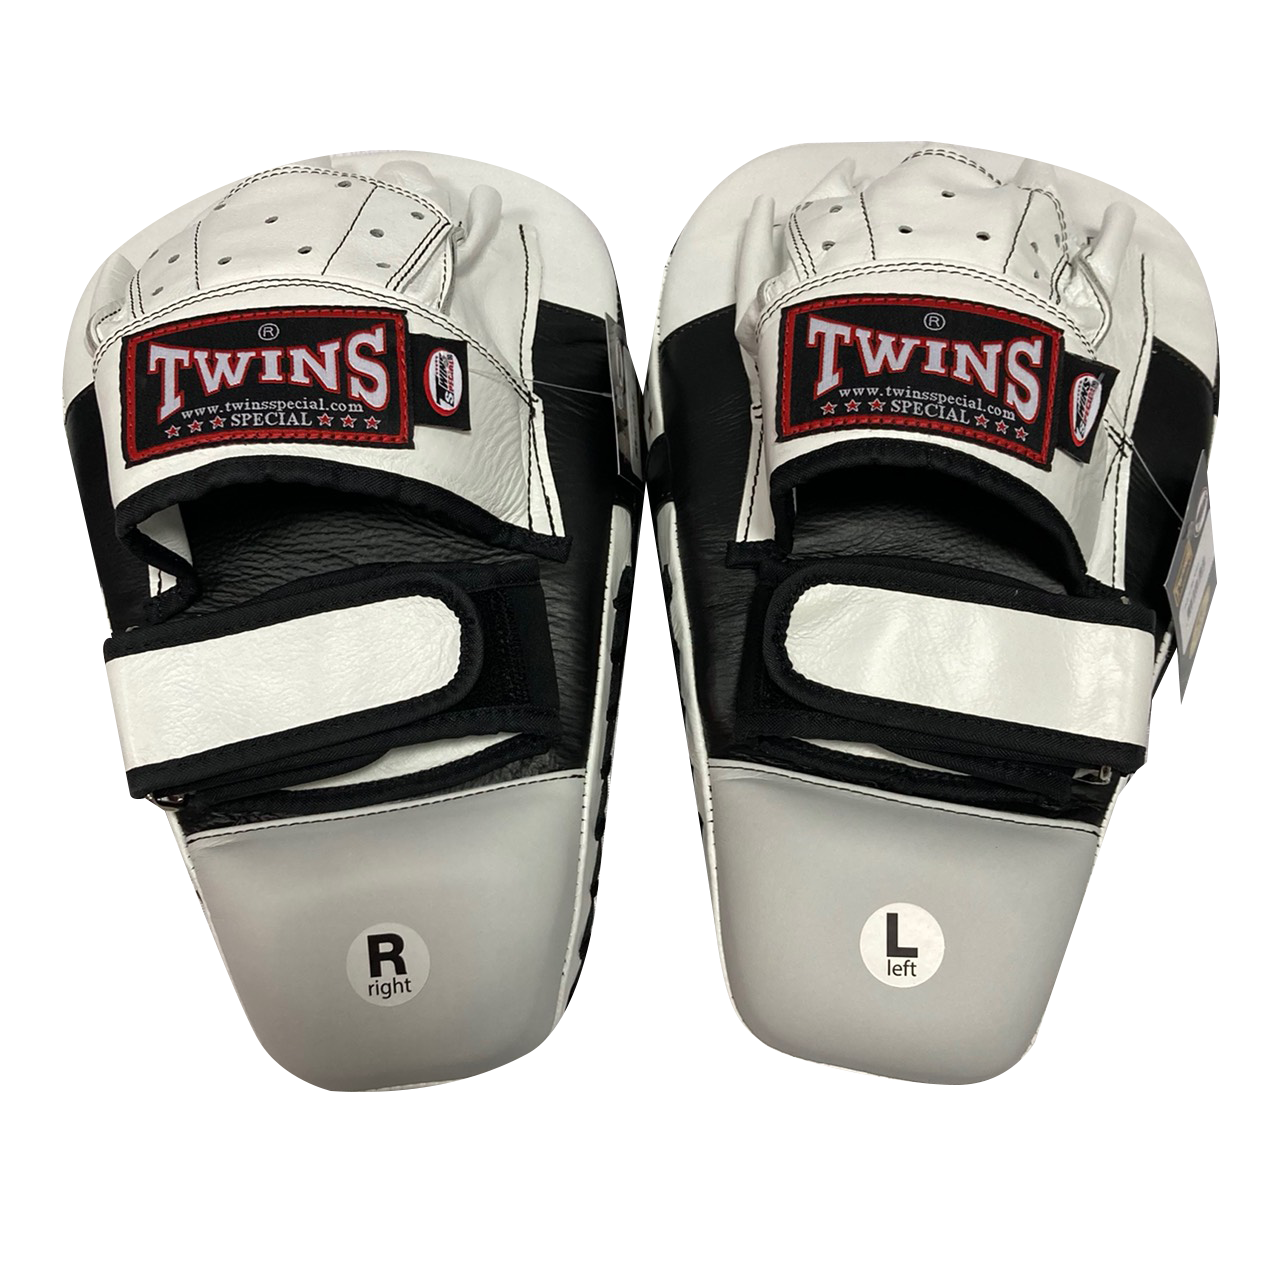 Twins Special Focus Mitts PML21 Black White